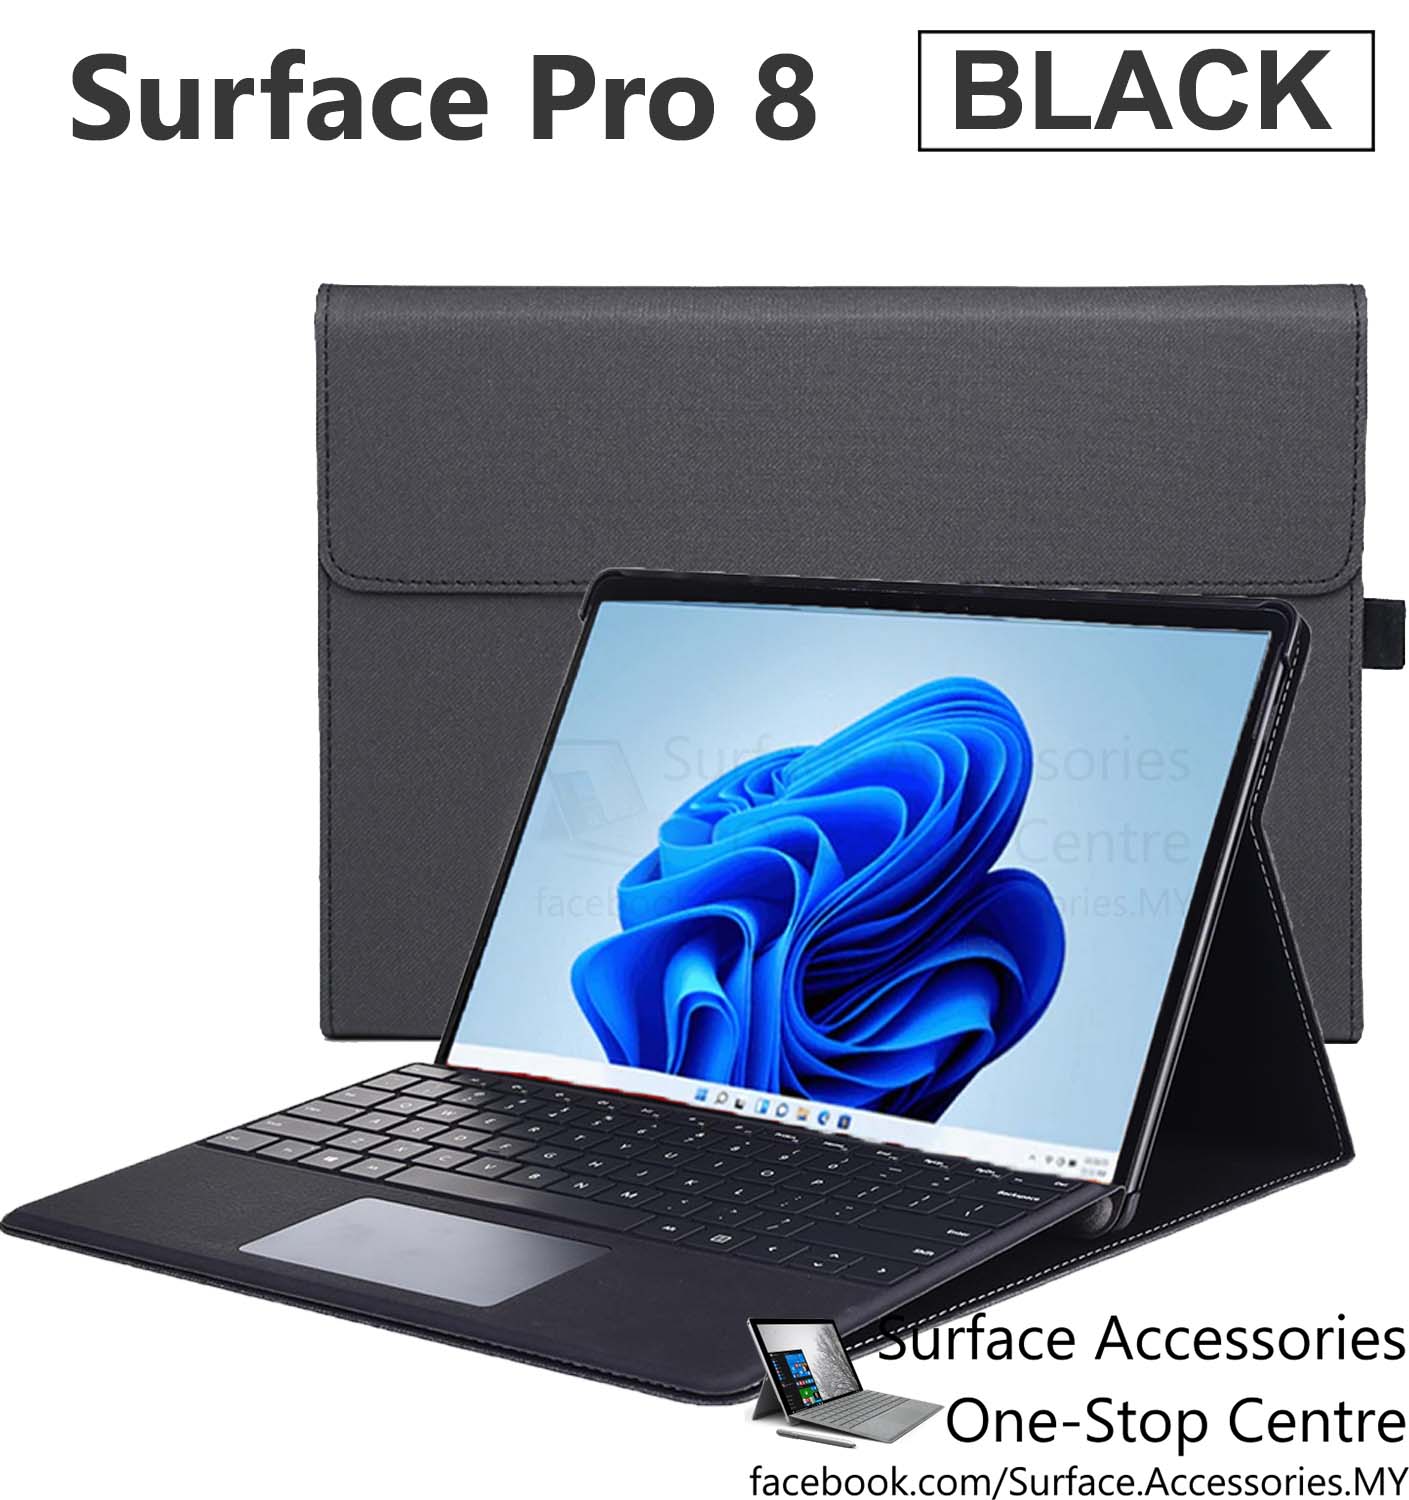 [MALAYSIA]Microsoft Surface Pro 8 Casing Surface Pro 8 Case Cover Ultimate Case Stand Flip Case Microsoft Surface Pro 8 Casing Microsoft Surface Pro 8 Case Microsoft Surface Pro 8 Cover